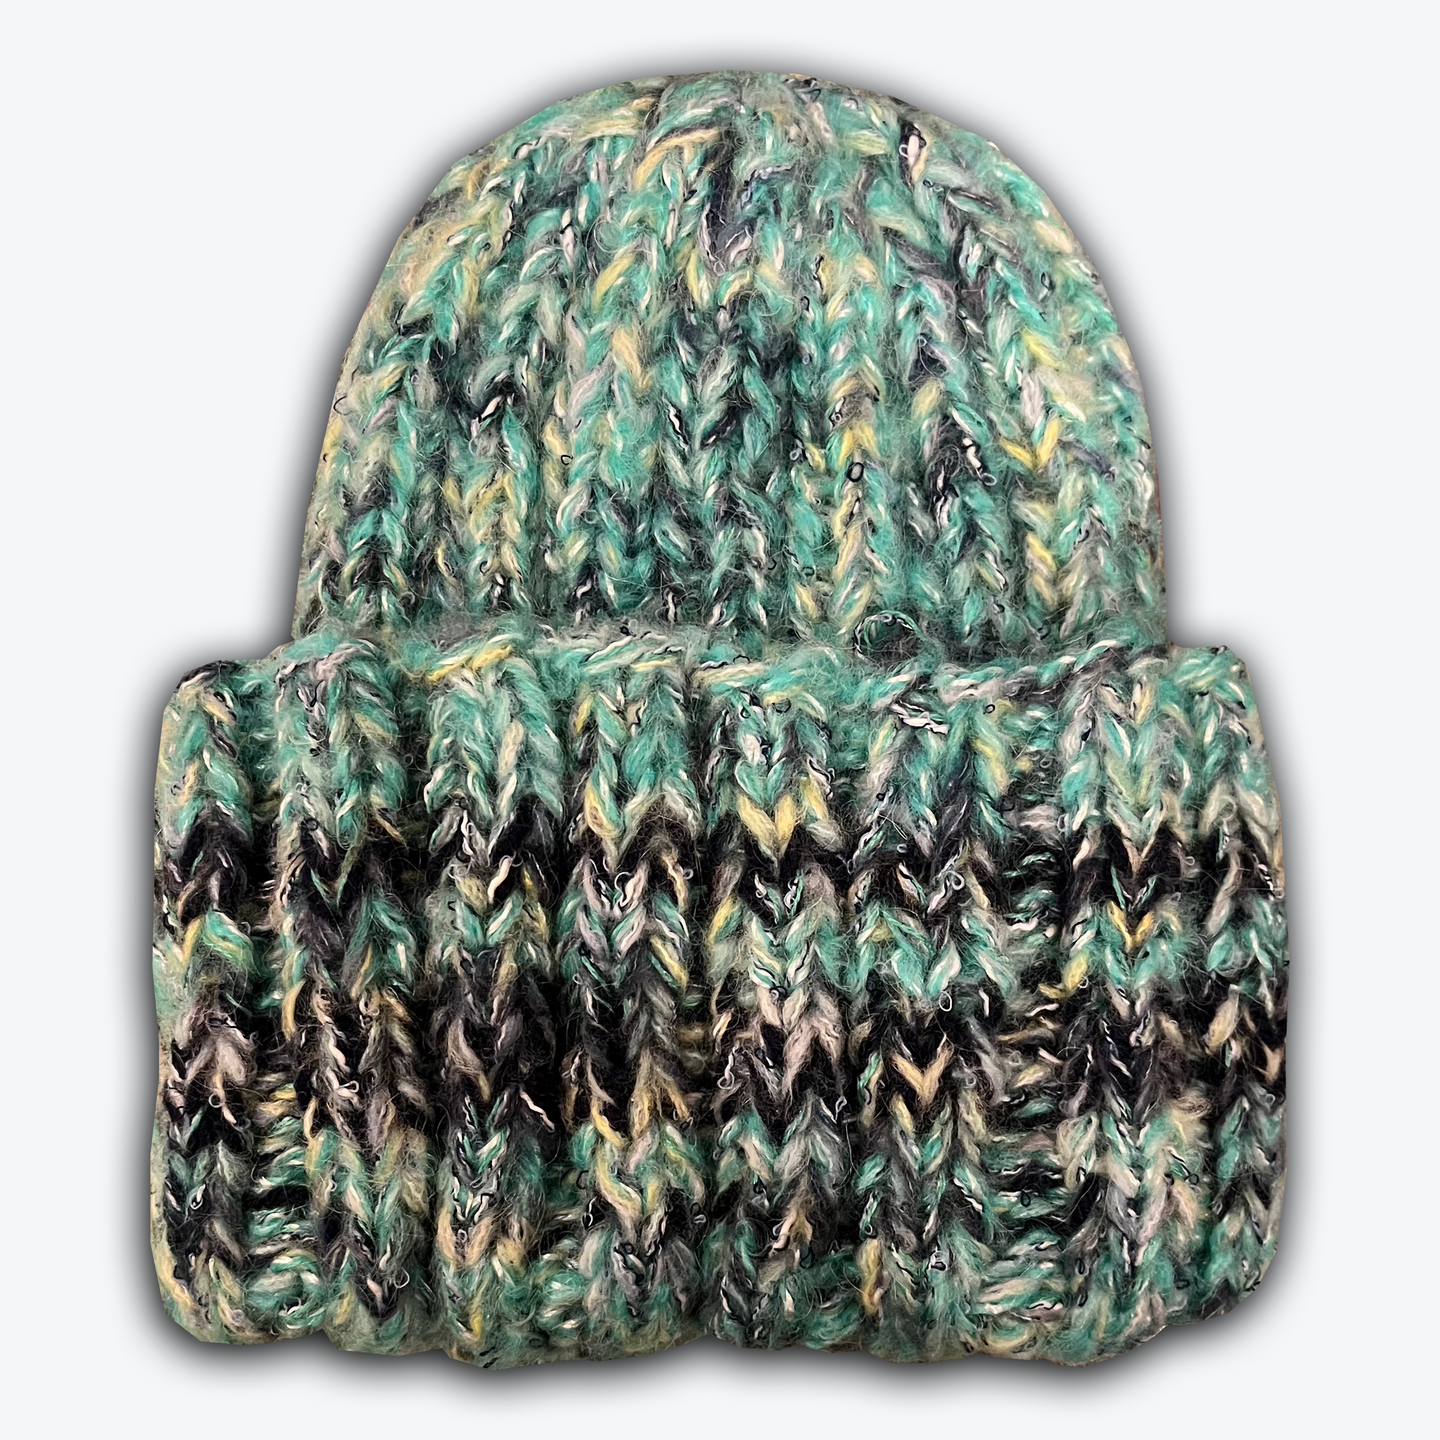 Hand Knitted Vintage Beanie (Multi)